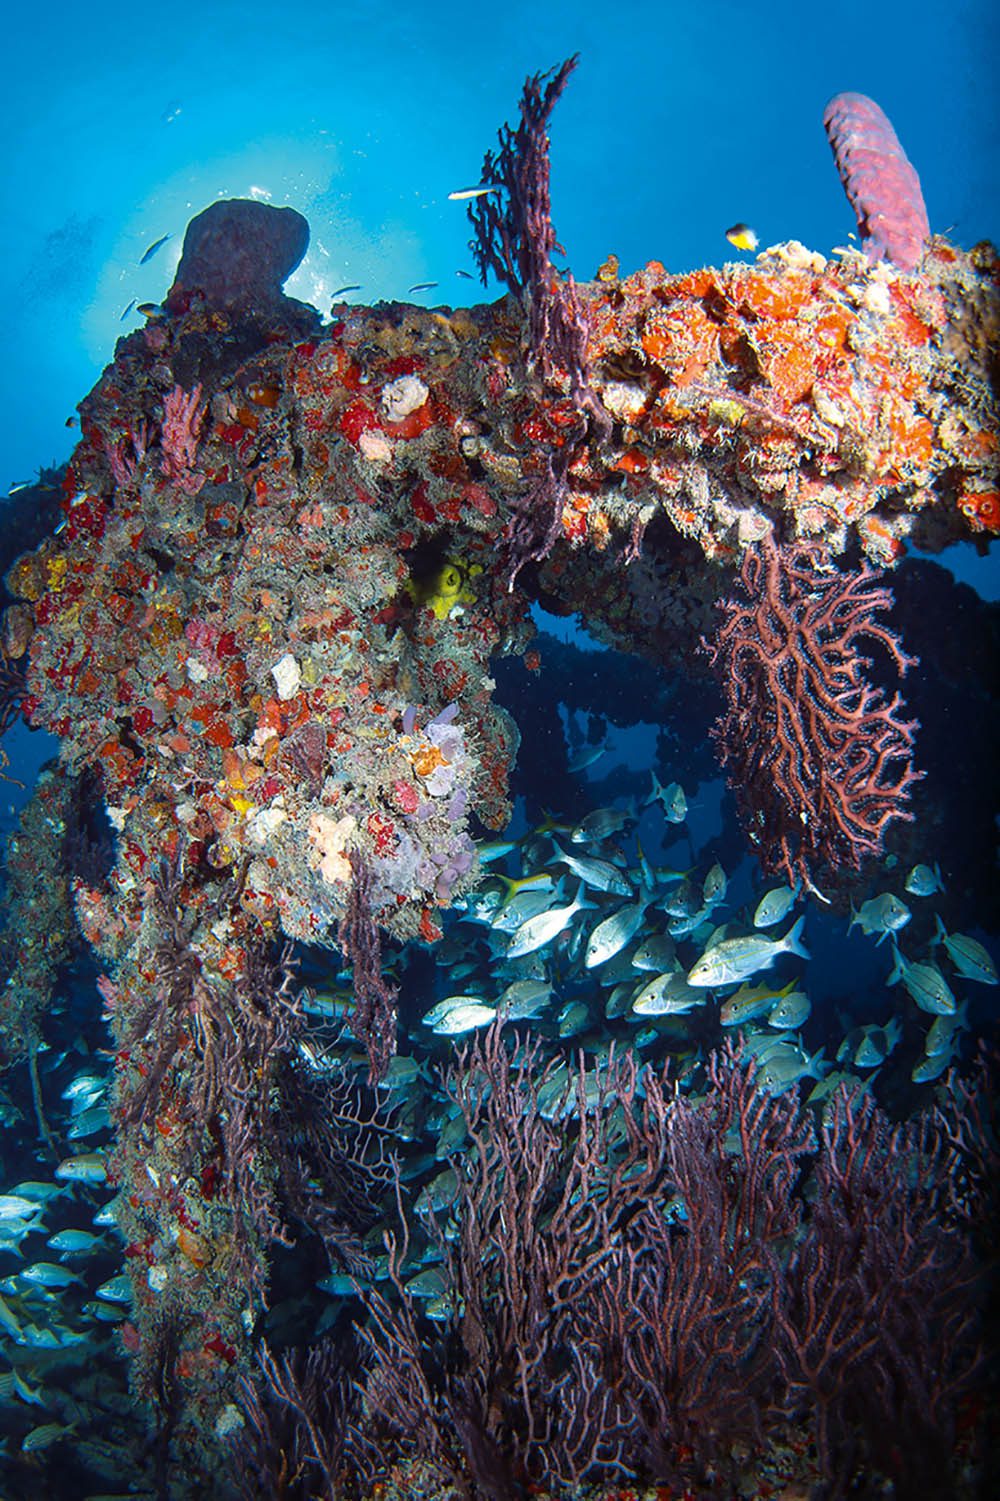 Jungle Gym is full of schools of fish, seafans, sponges and soft corals.